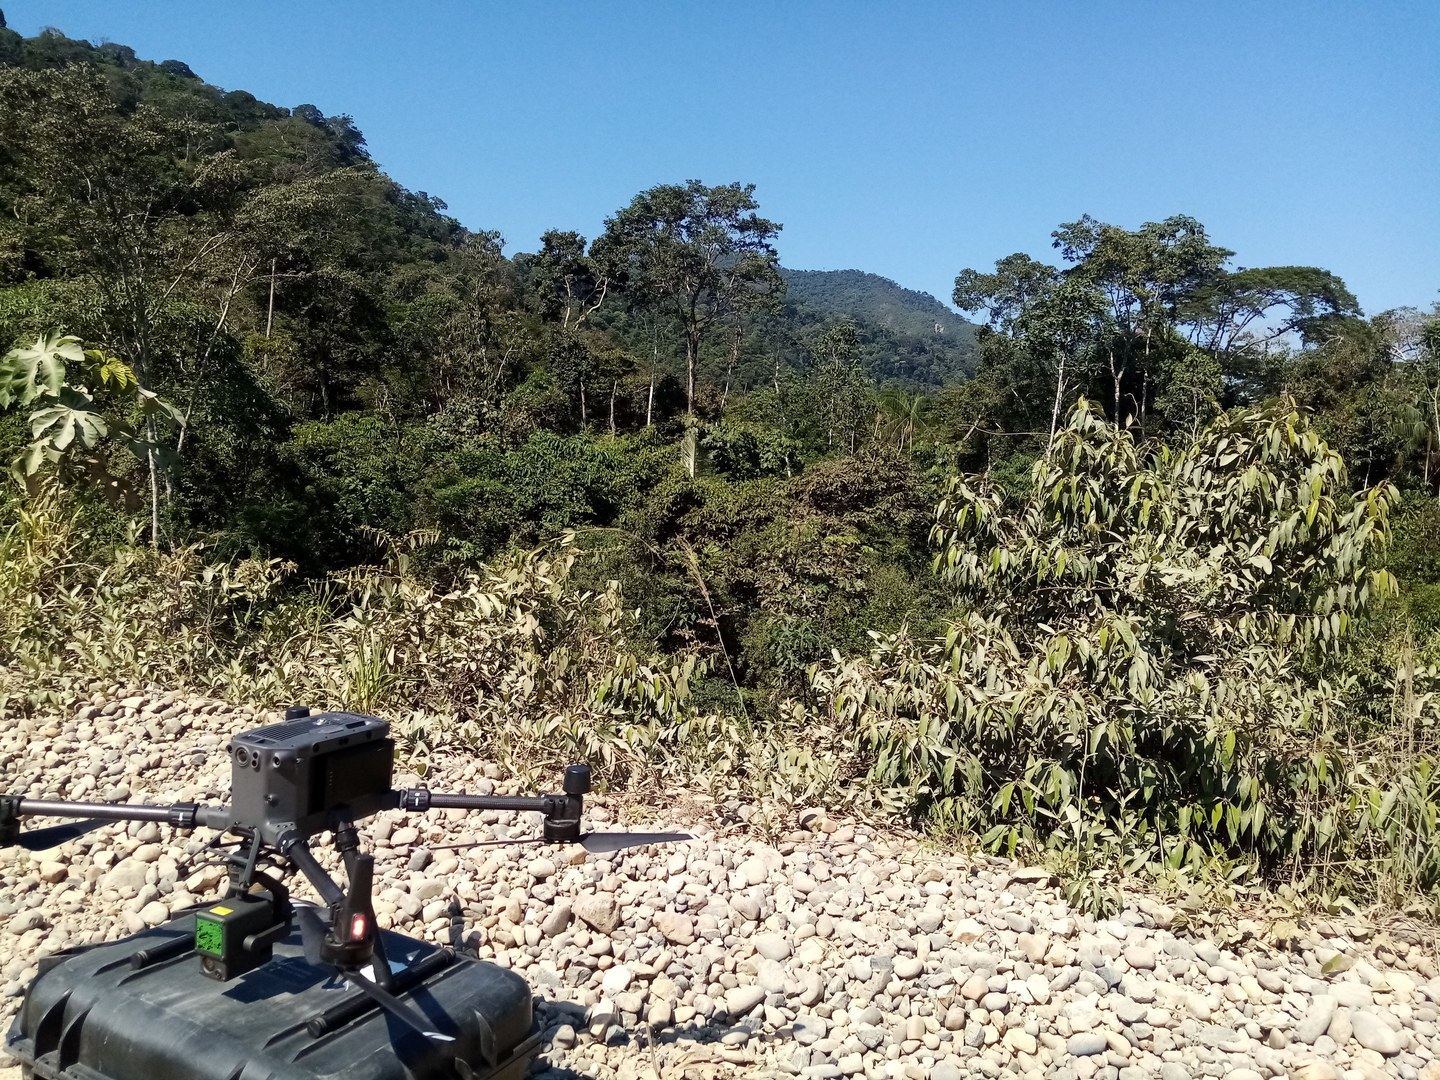 Preparing the drone to fly over the site known as "La Ruinas" in Macahua, located at the top of the mountain in the background of the image